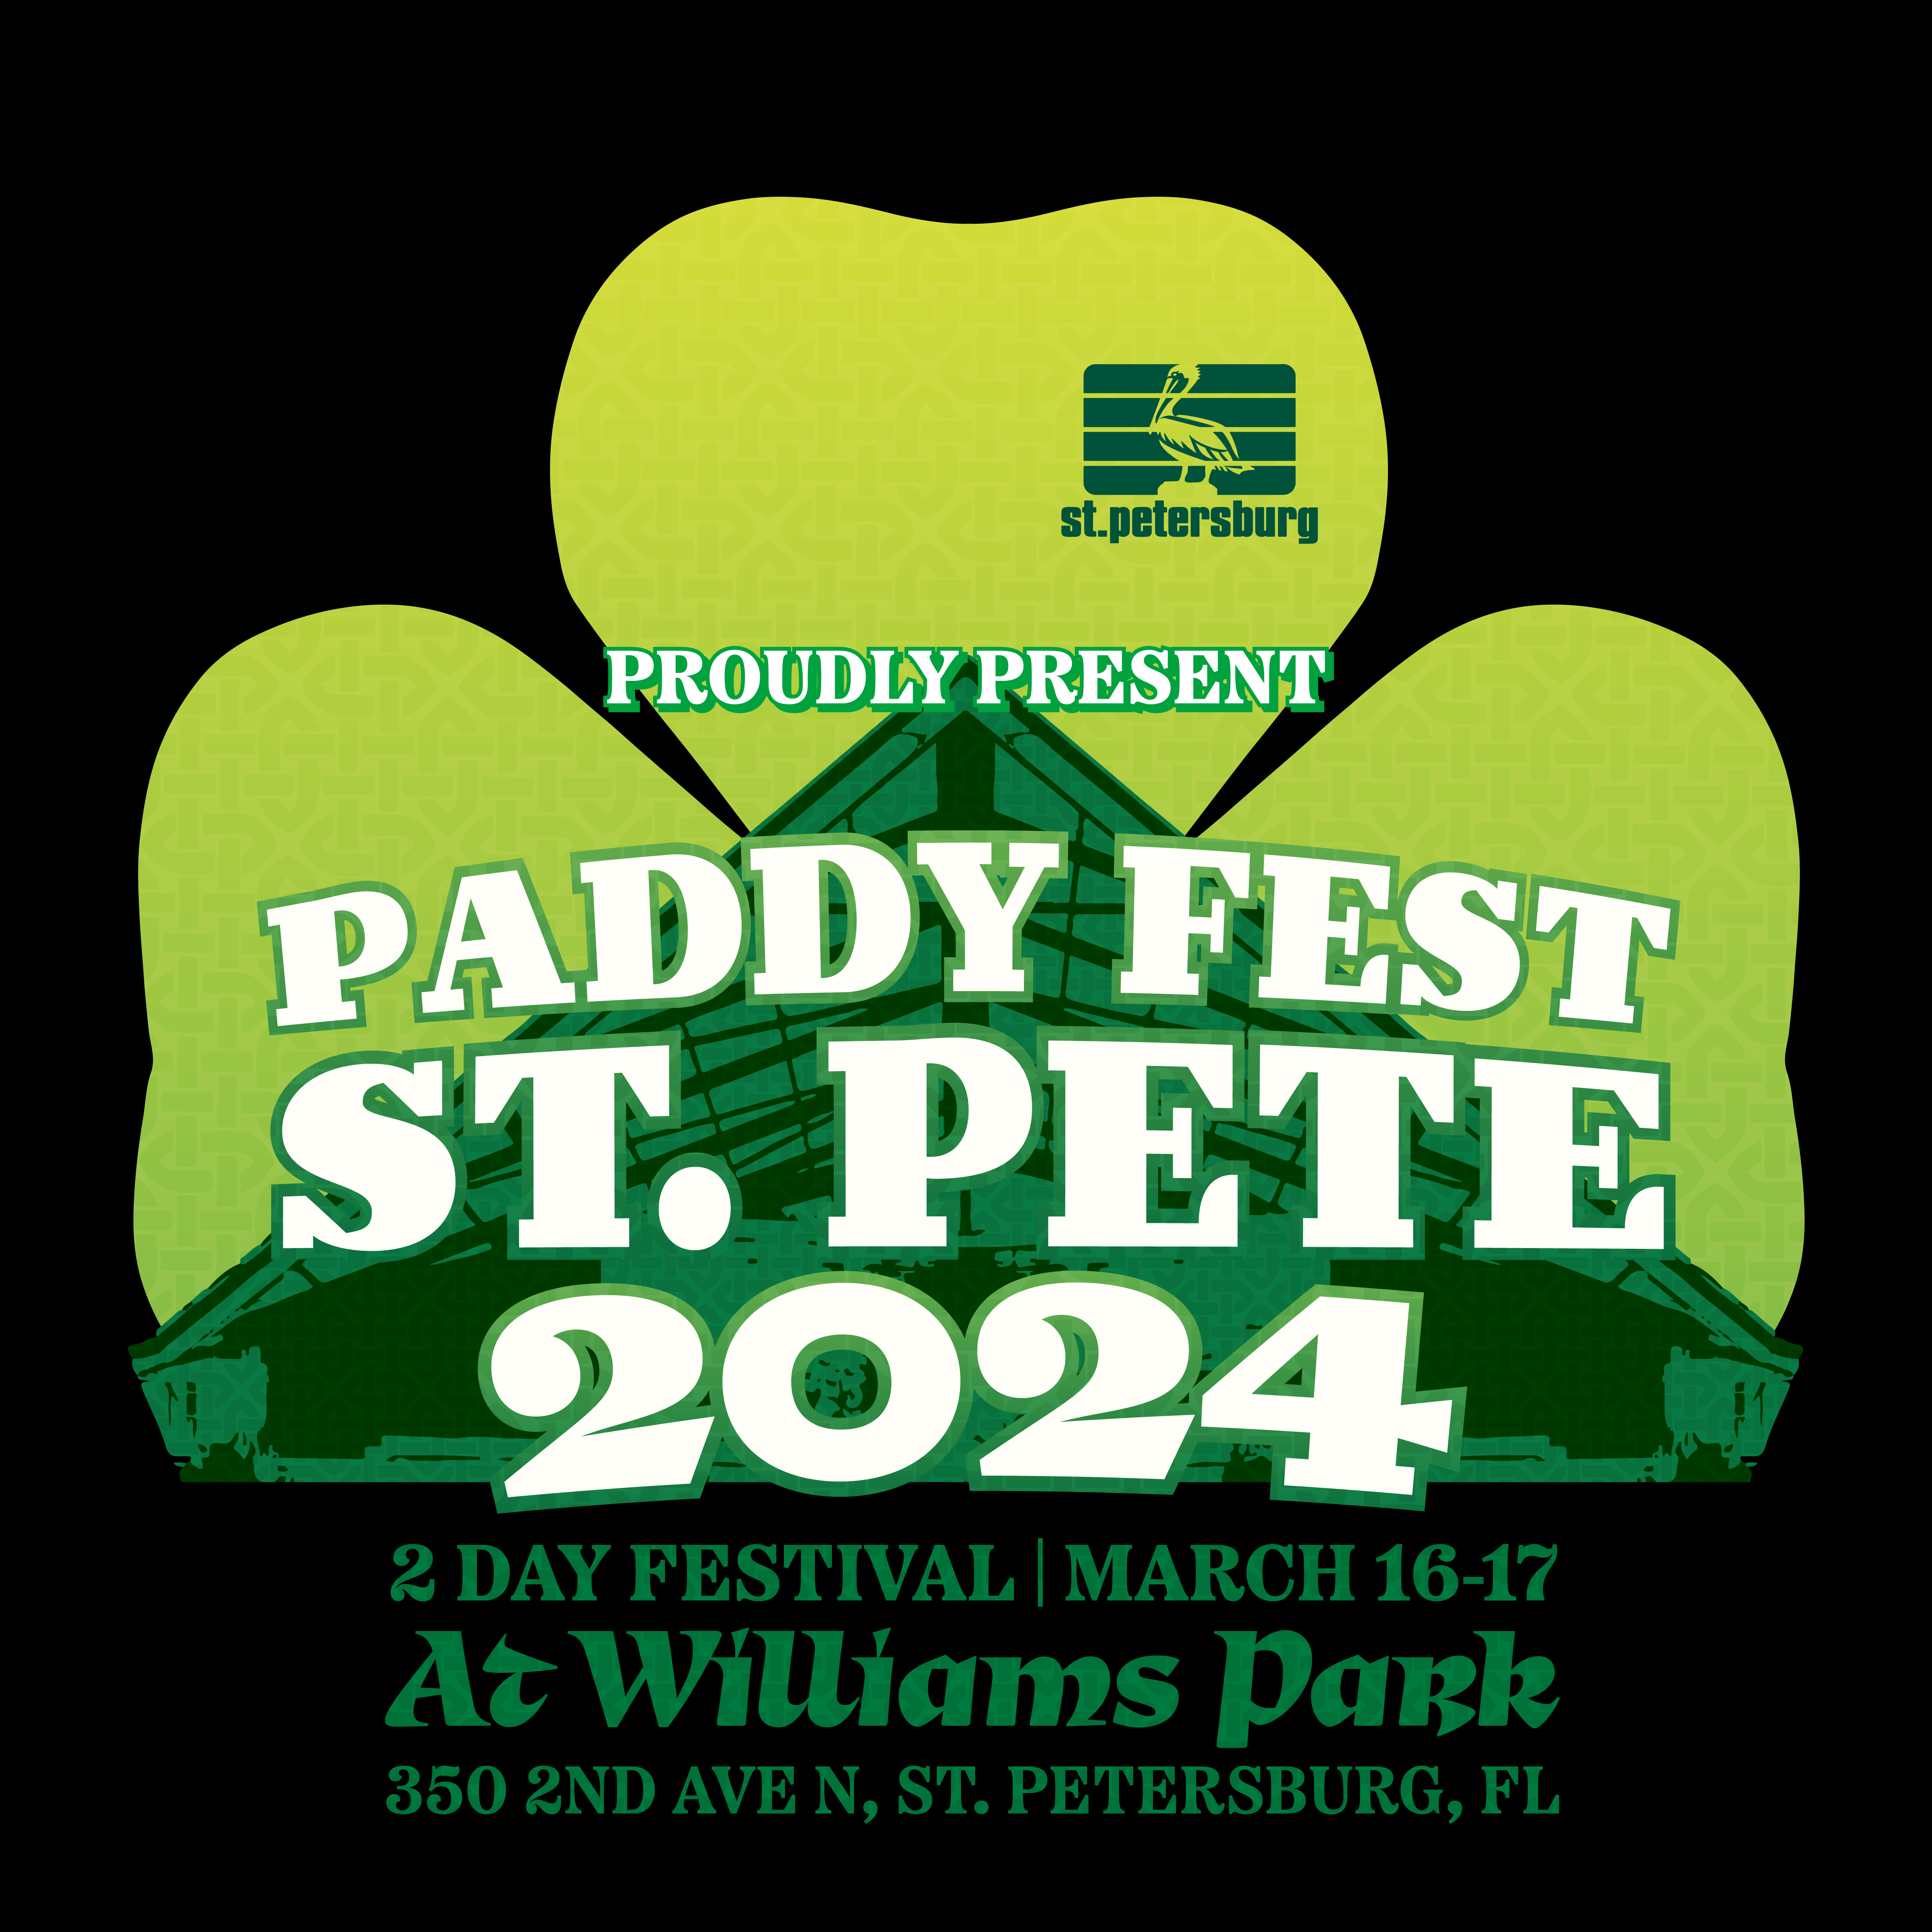 Two Days of Family Fun in Williams Park at 2nd Annual “Paddy Fest St. Pete”